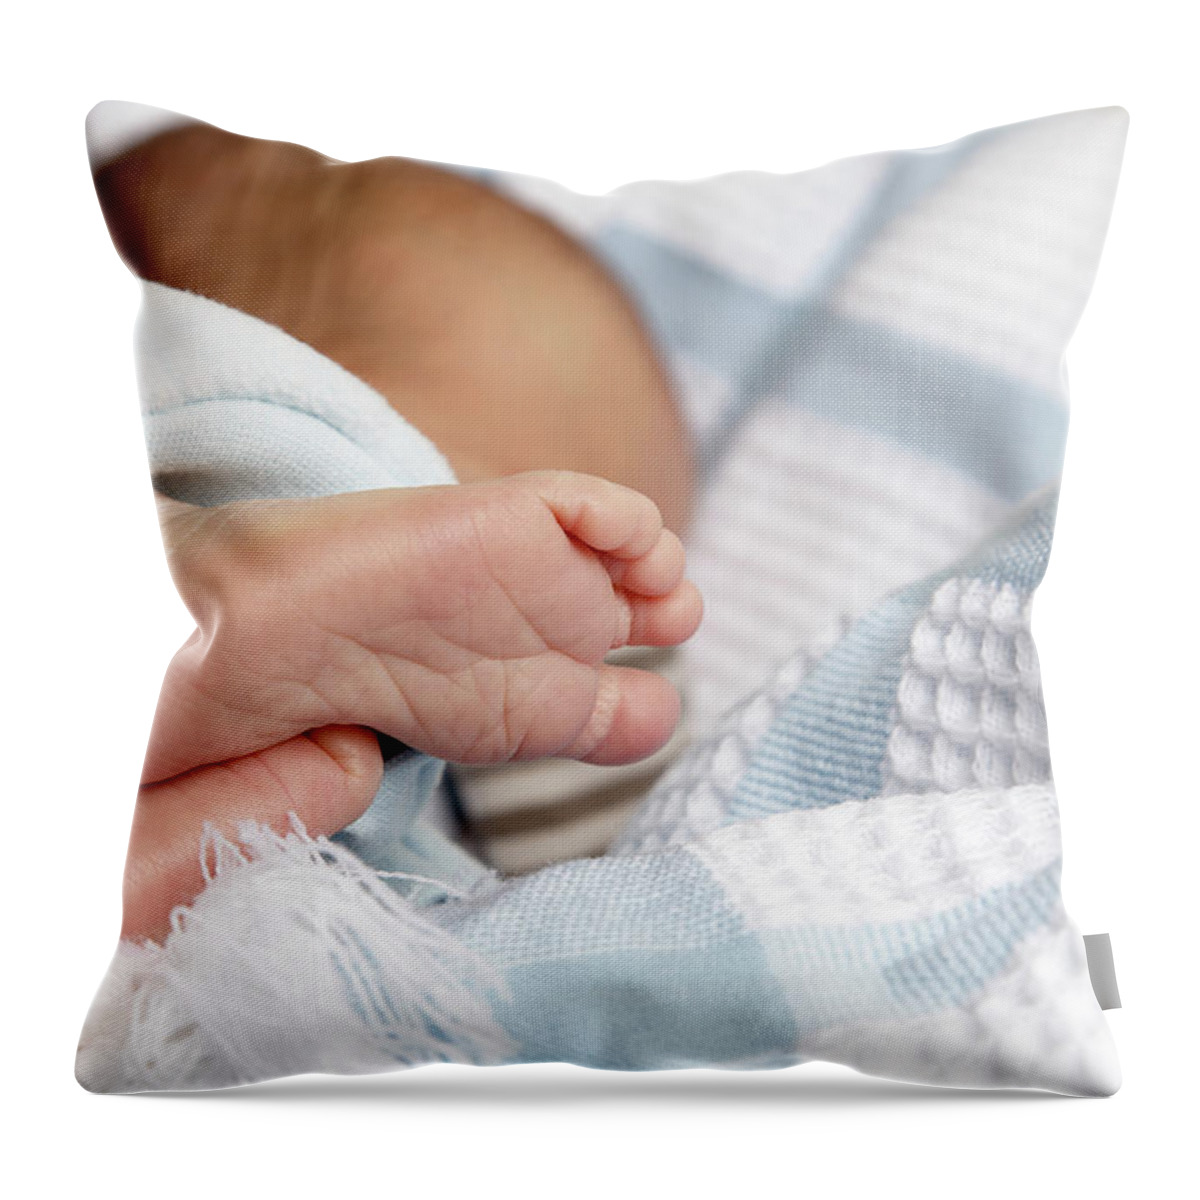 Caucasian Ethnicity Throw Pillow featuring the photograph Babys Feet And Toes Showing Heel Prick by Tirc83